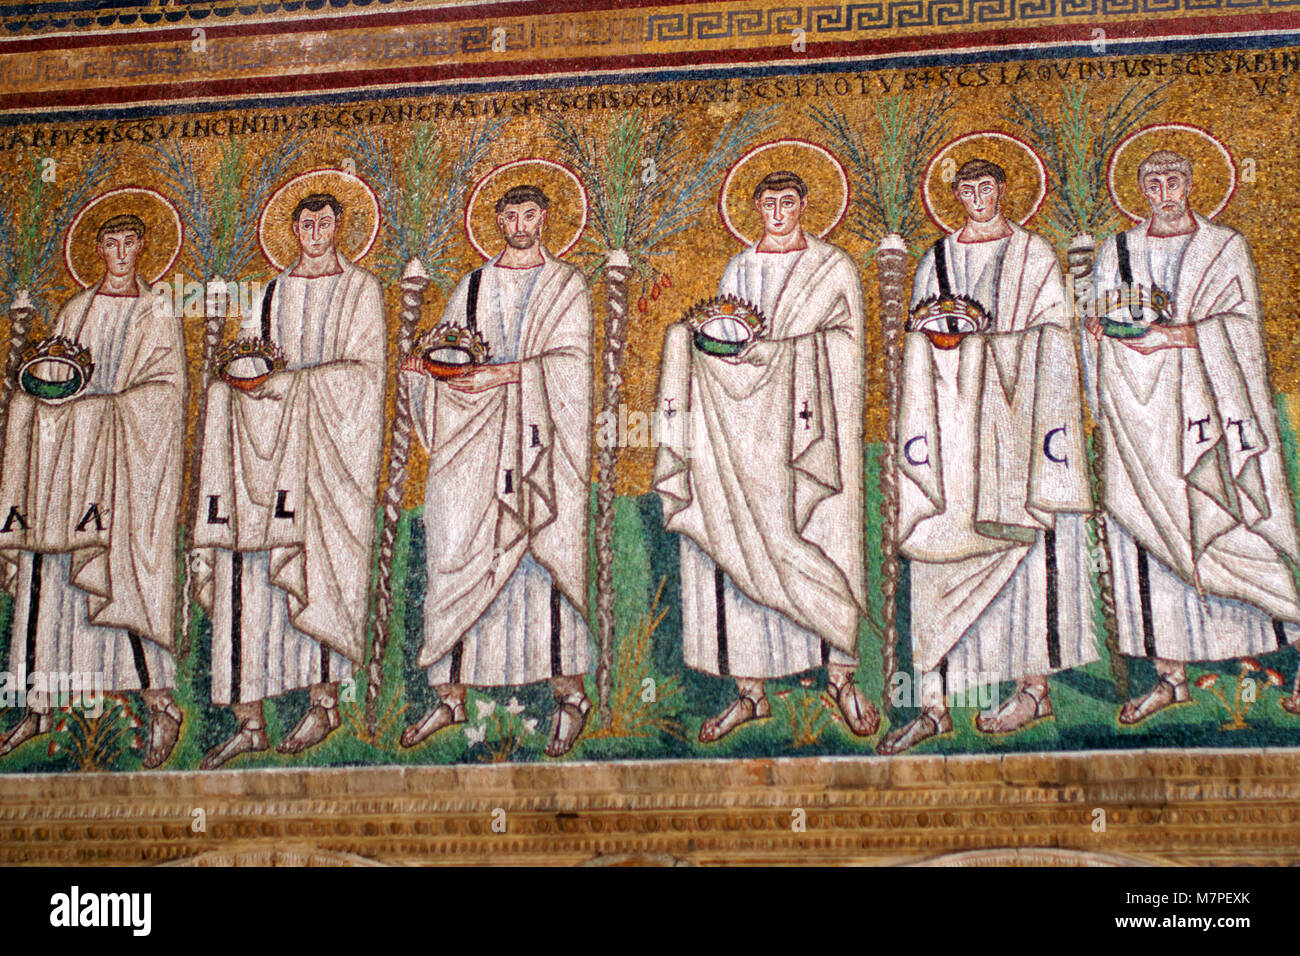 Ravenna, Italy - June 15, 2017: Mosaics in the Basilica of Sant'Apollinare Nuovo which was erected in VI century. Early Christian Monuments of Ravenna Stock Photo